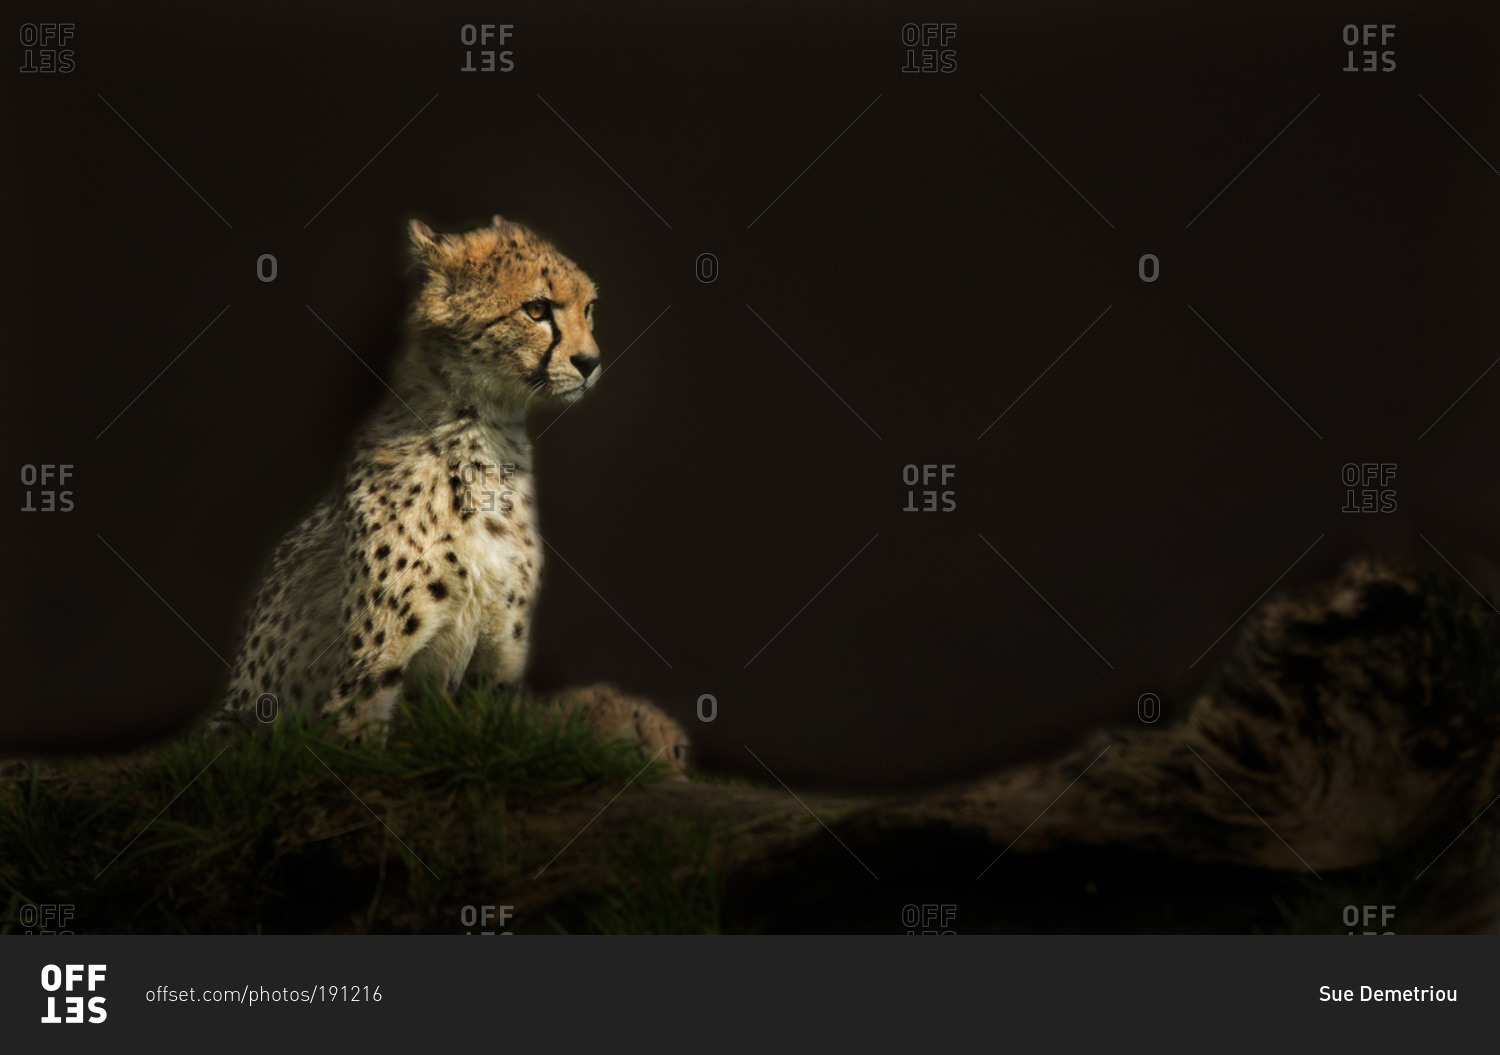 Cheetah cub sitting on ground with black background